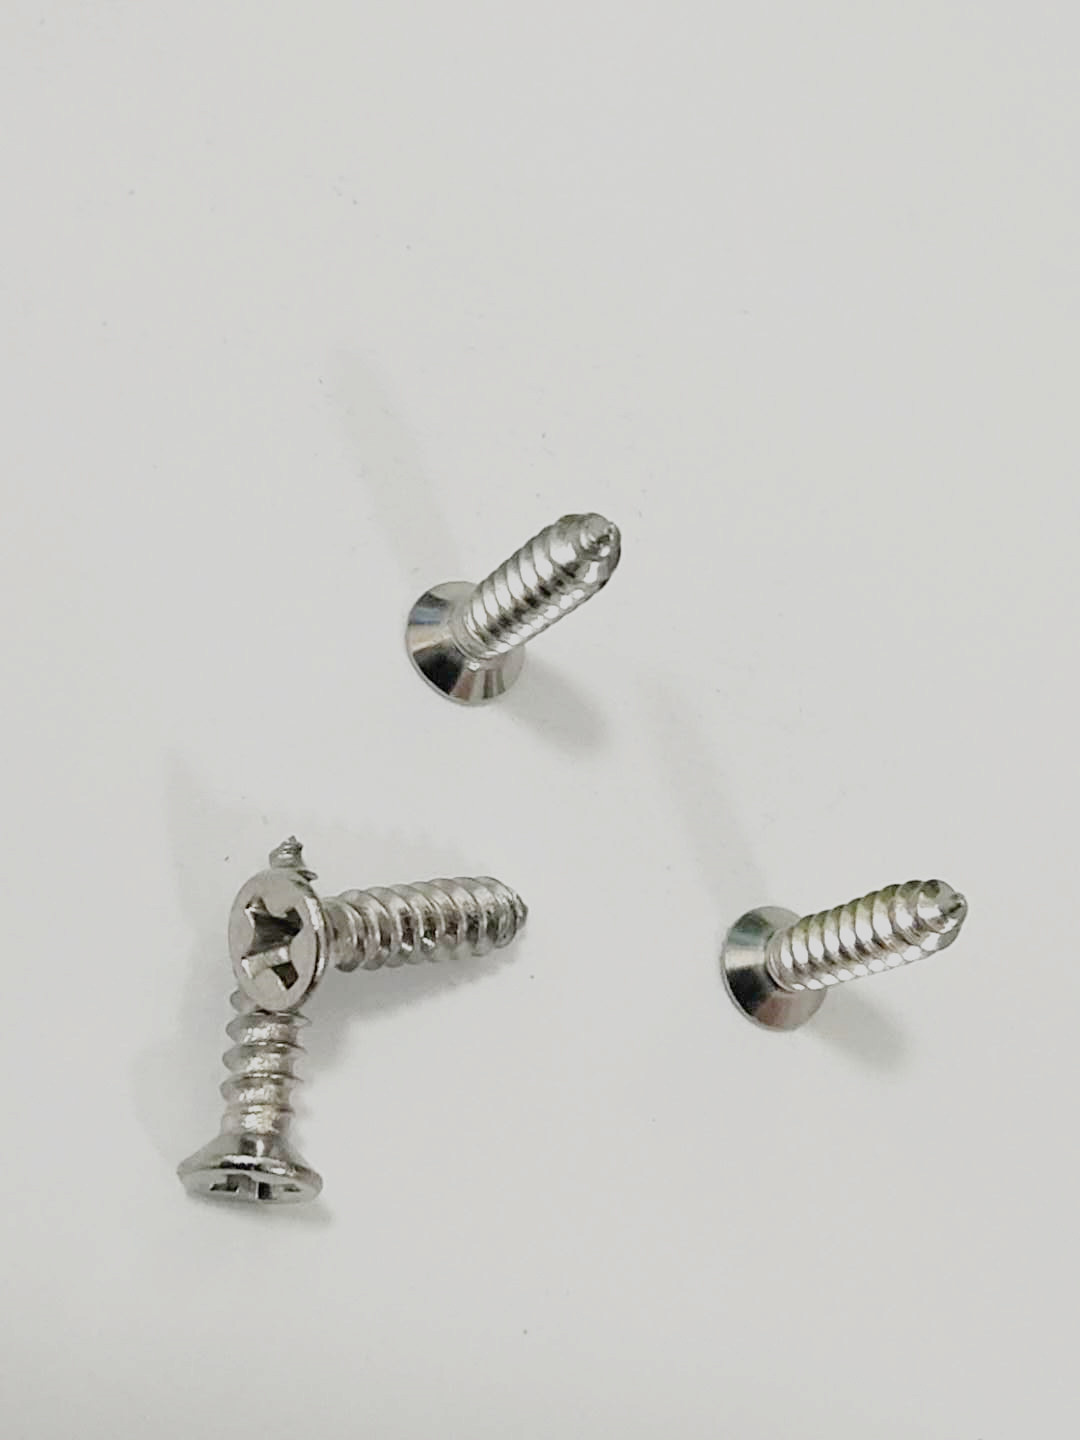 M4 M8 stainless steel countersunk head self tapping screws for sale